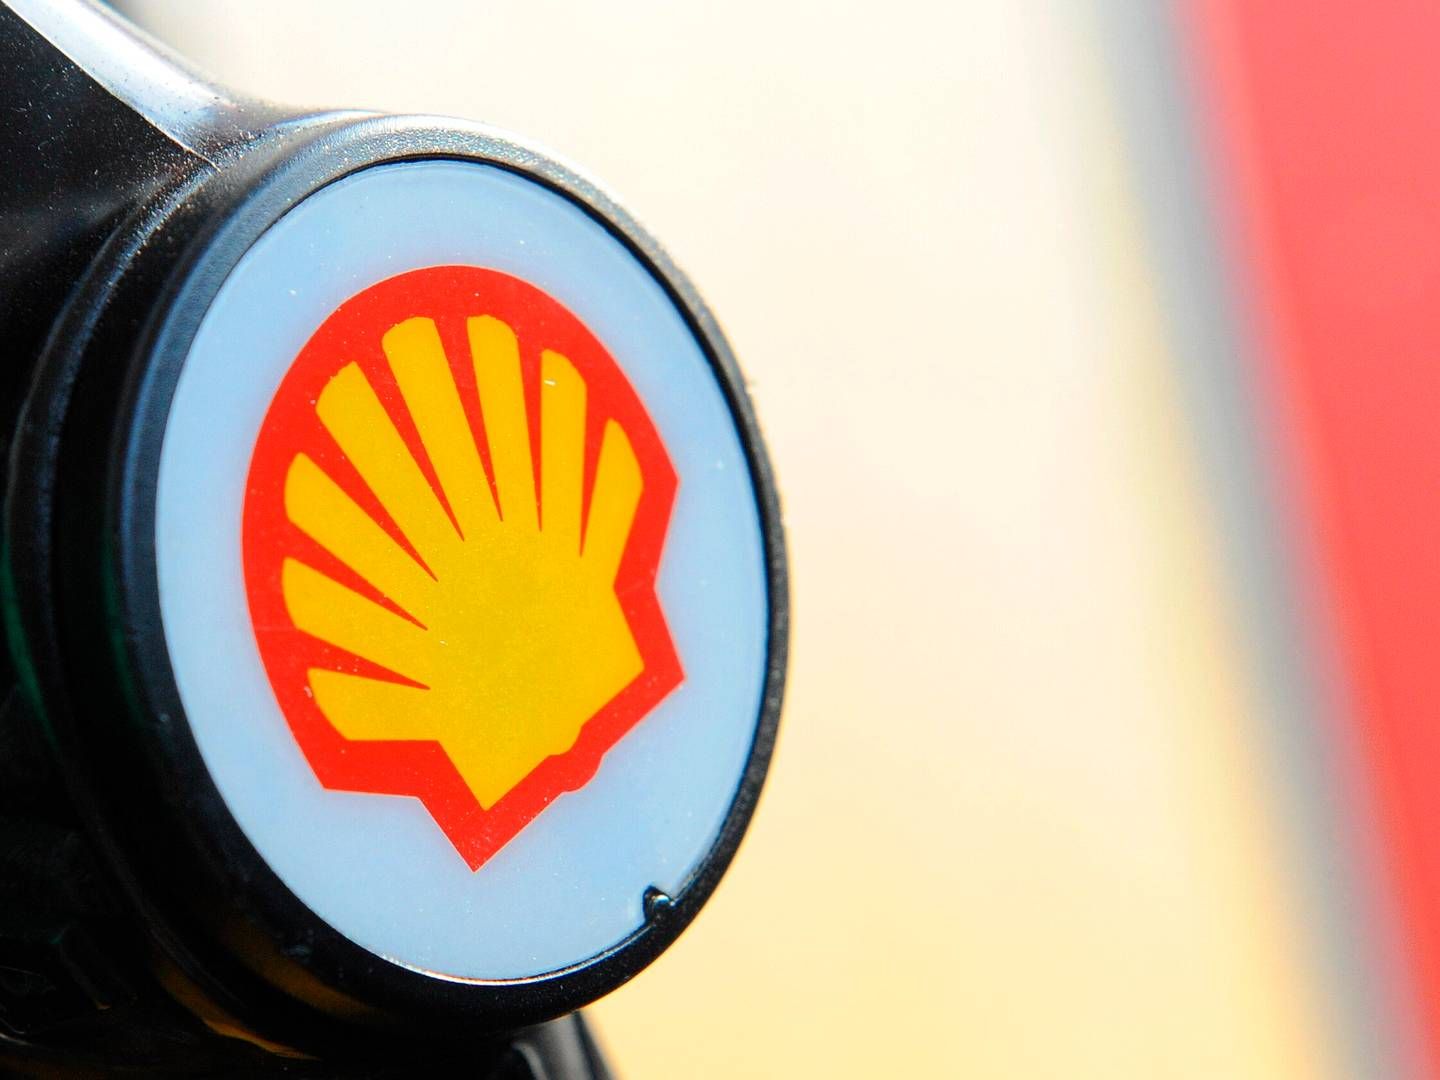 According to the BBC, Shell says that the deals are due to "long-term contractual commitments" and do not violate any laws or sanctions. | Photo: Toby Melville/Reuters/Ritzau Scanpix